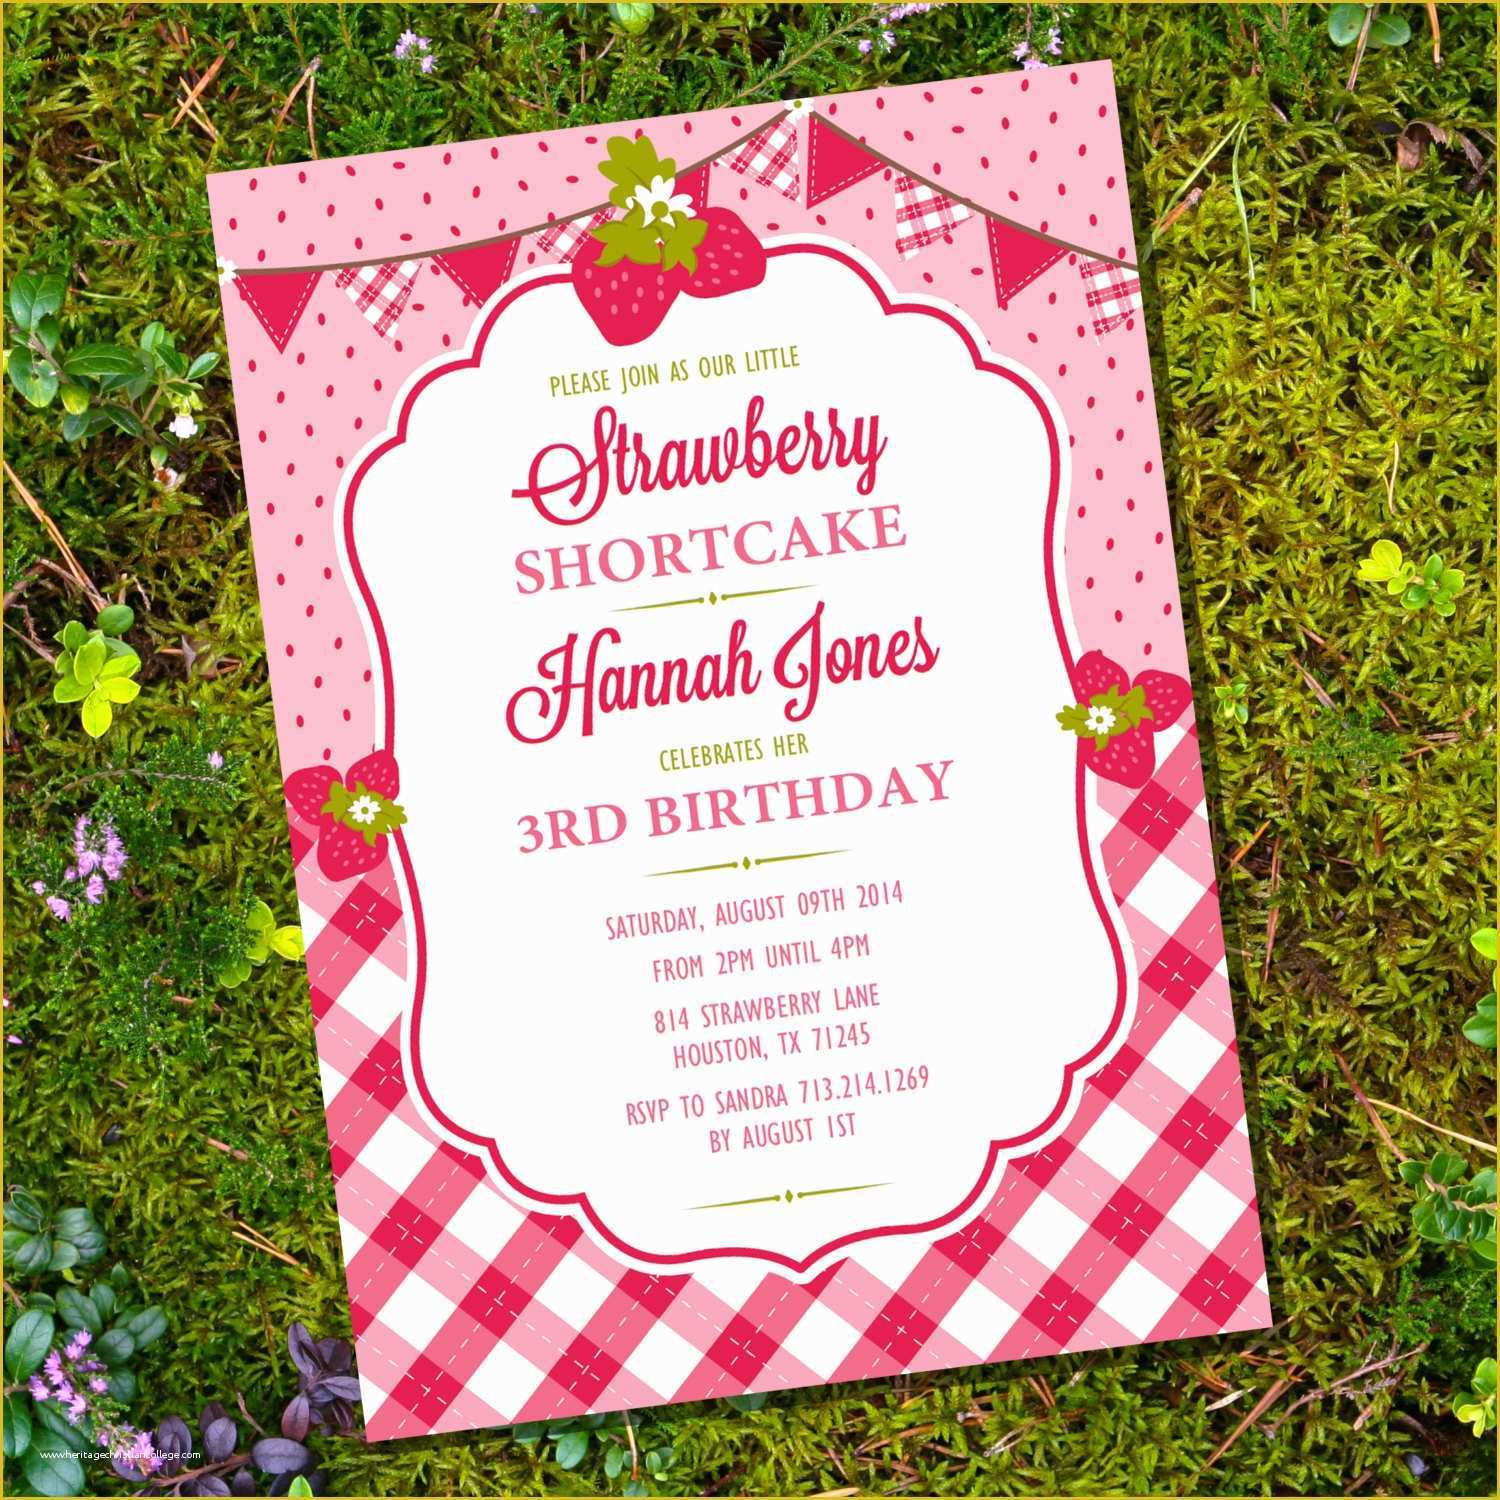 Strawberry Shortcake Invitation Template Free Download Of Strawberry Shortcake Party Invitation for A Girl Instant